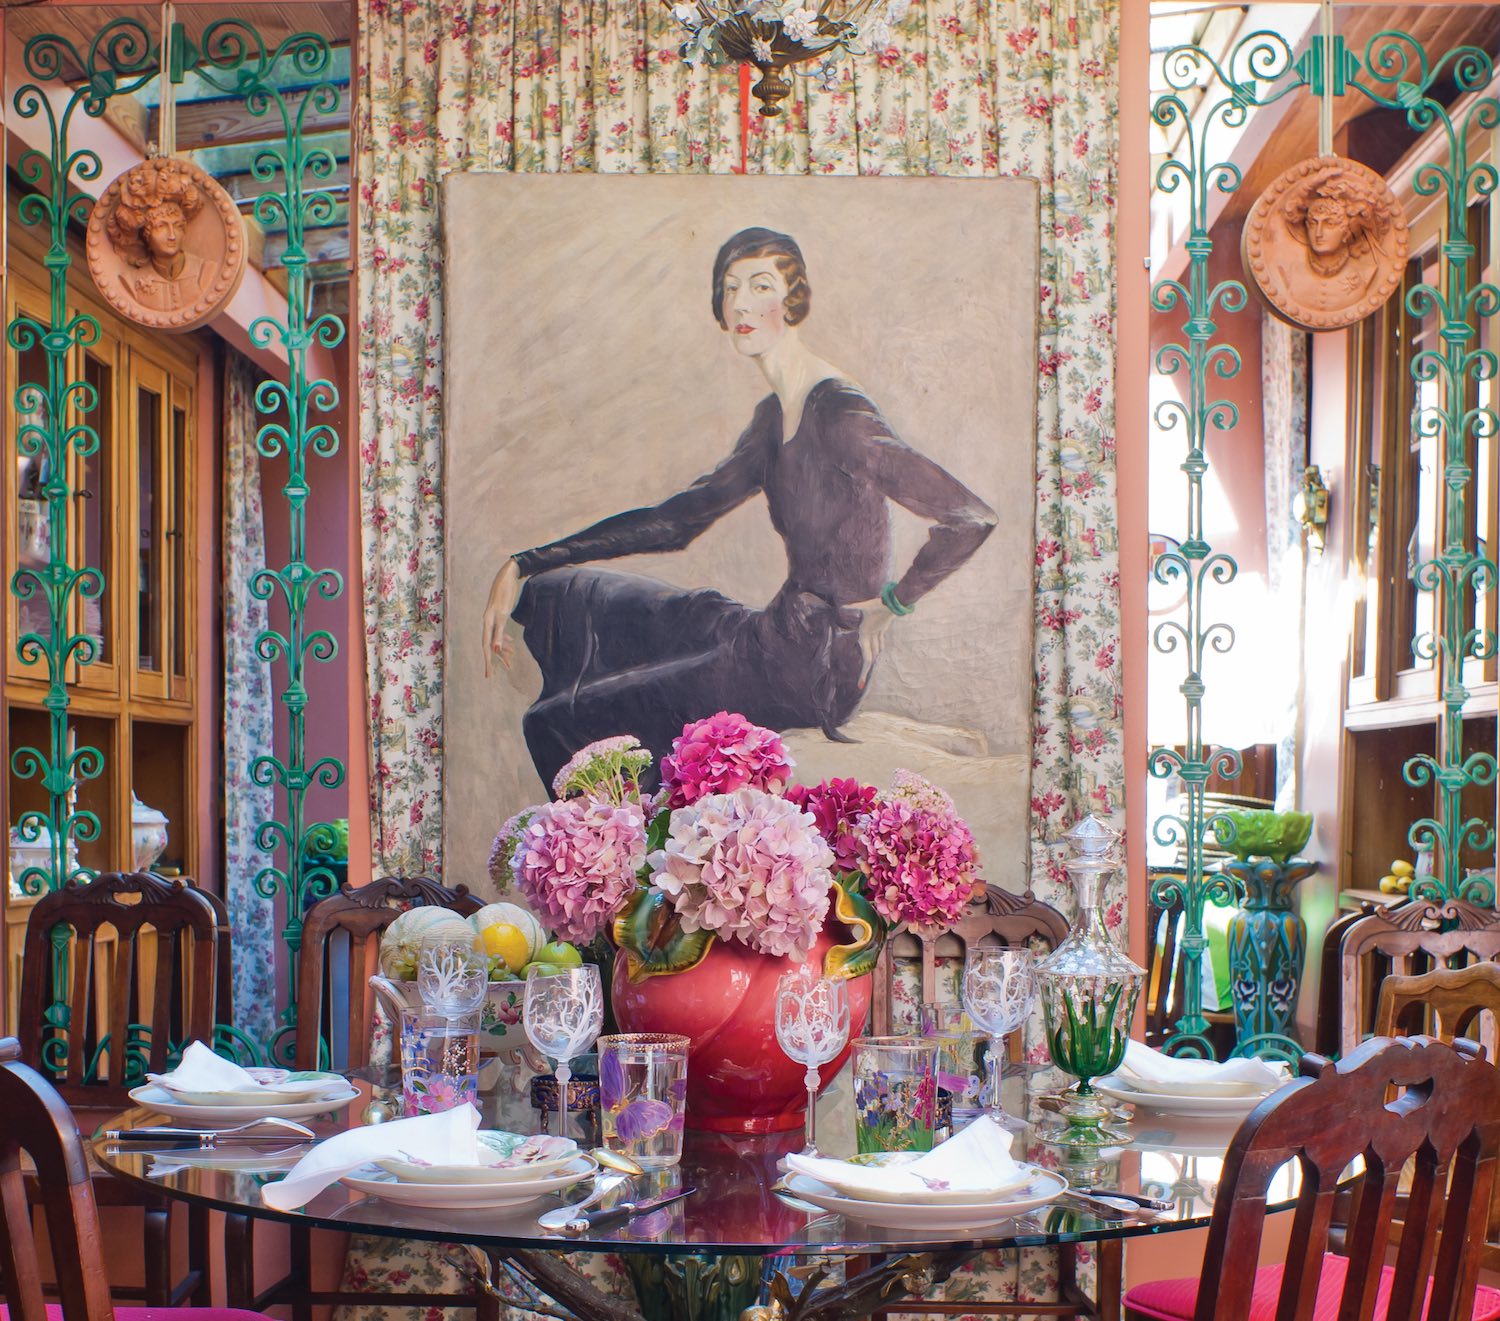 A centerpiece of hydrangeas in shades of pink completes Countess Joy de Rohan Chabot's exuberant dining room table set with her hand-painted glassware. 